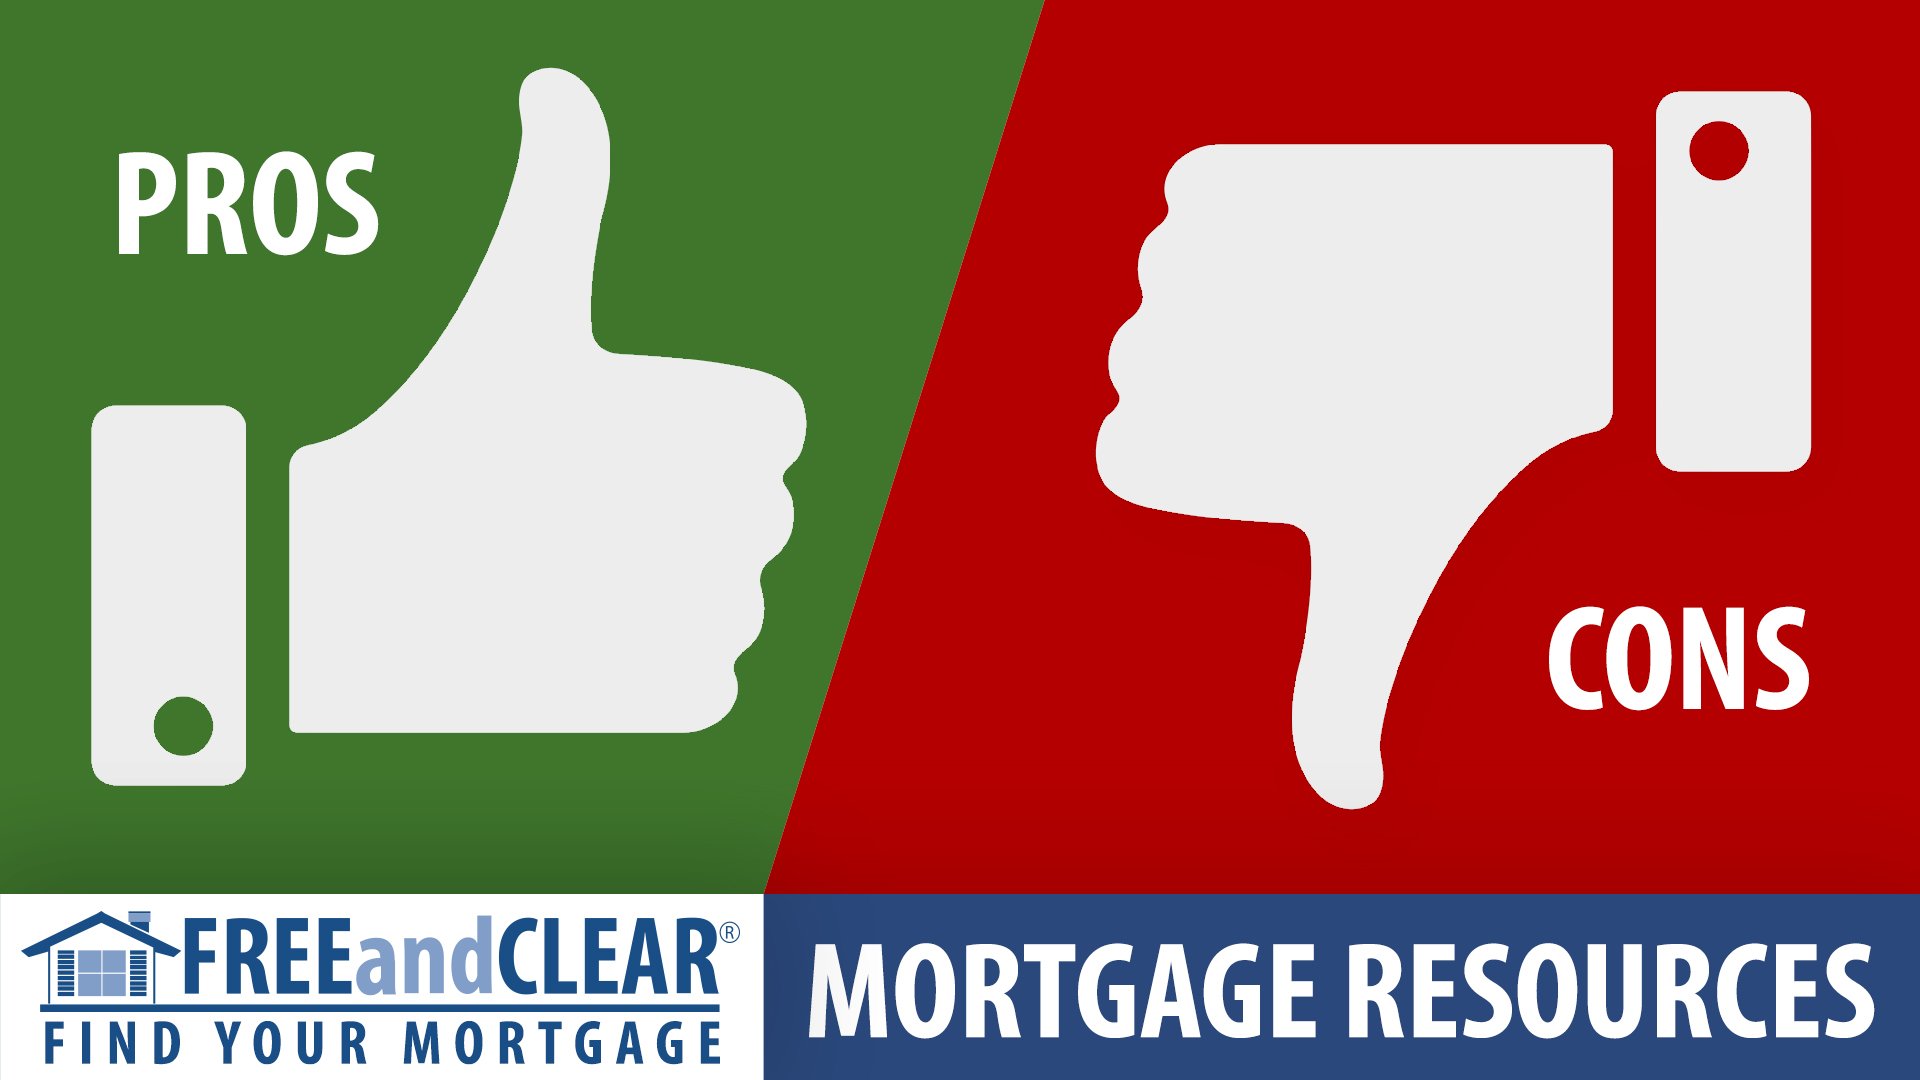 Chase DreaMaker Mortgage Pros and Cons | FREEandCLEAR